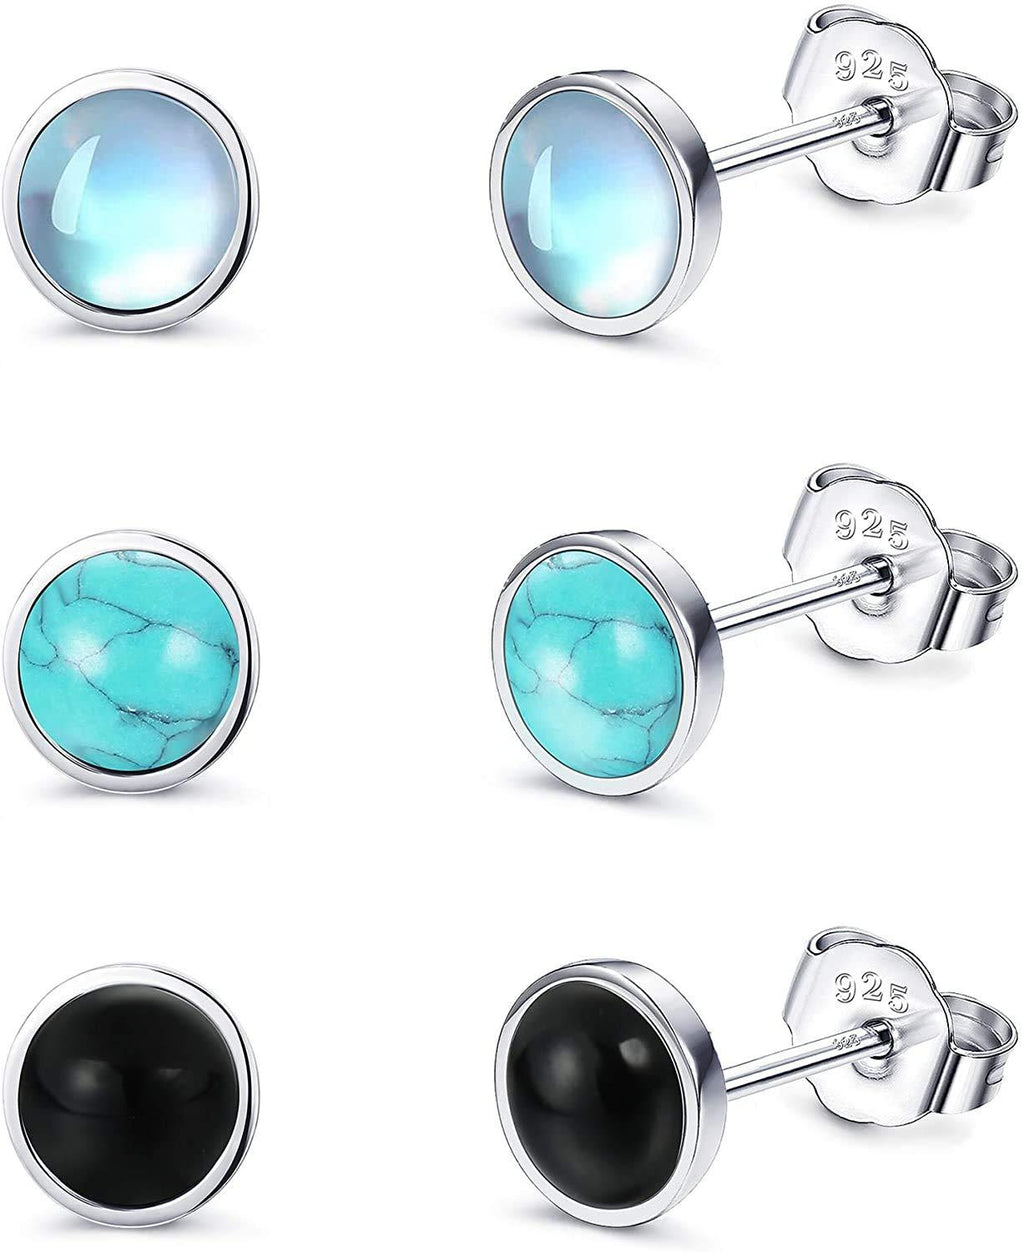 [Australia] - LOLIAS 4MM 925 Sterling Silver Stud Earrings Set for Womens Teens Solid Silver Moonstone Earrings Hypoallergenic Turquoise Black Earrings Round Gemstone Stud Gift Daughter Christmas Valentine’s Day 